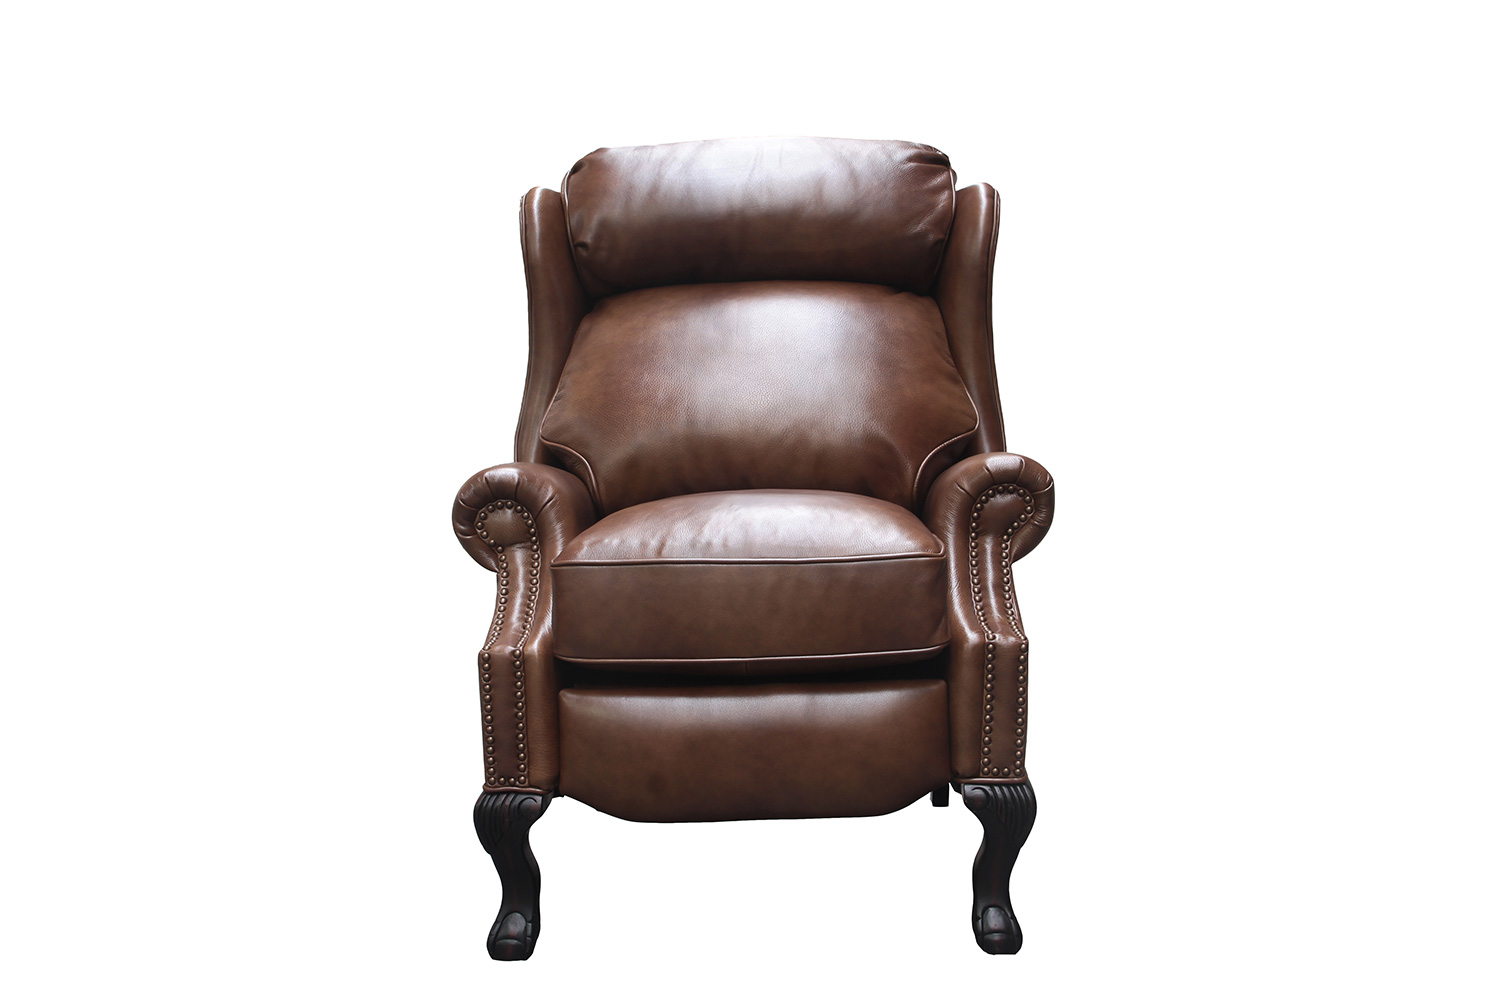 Barcalounger Danbury Recliner Chair - Wenlock Tawny/All Leather